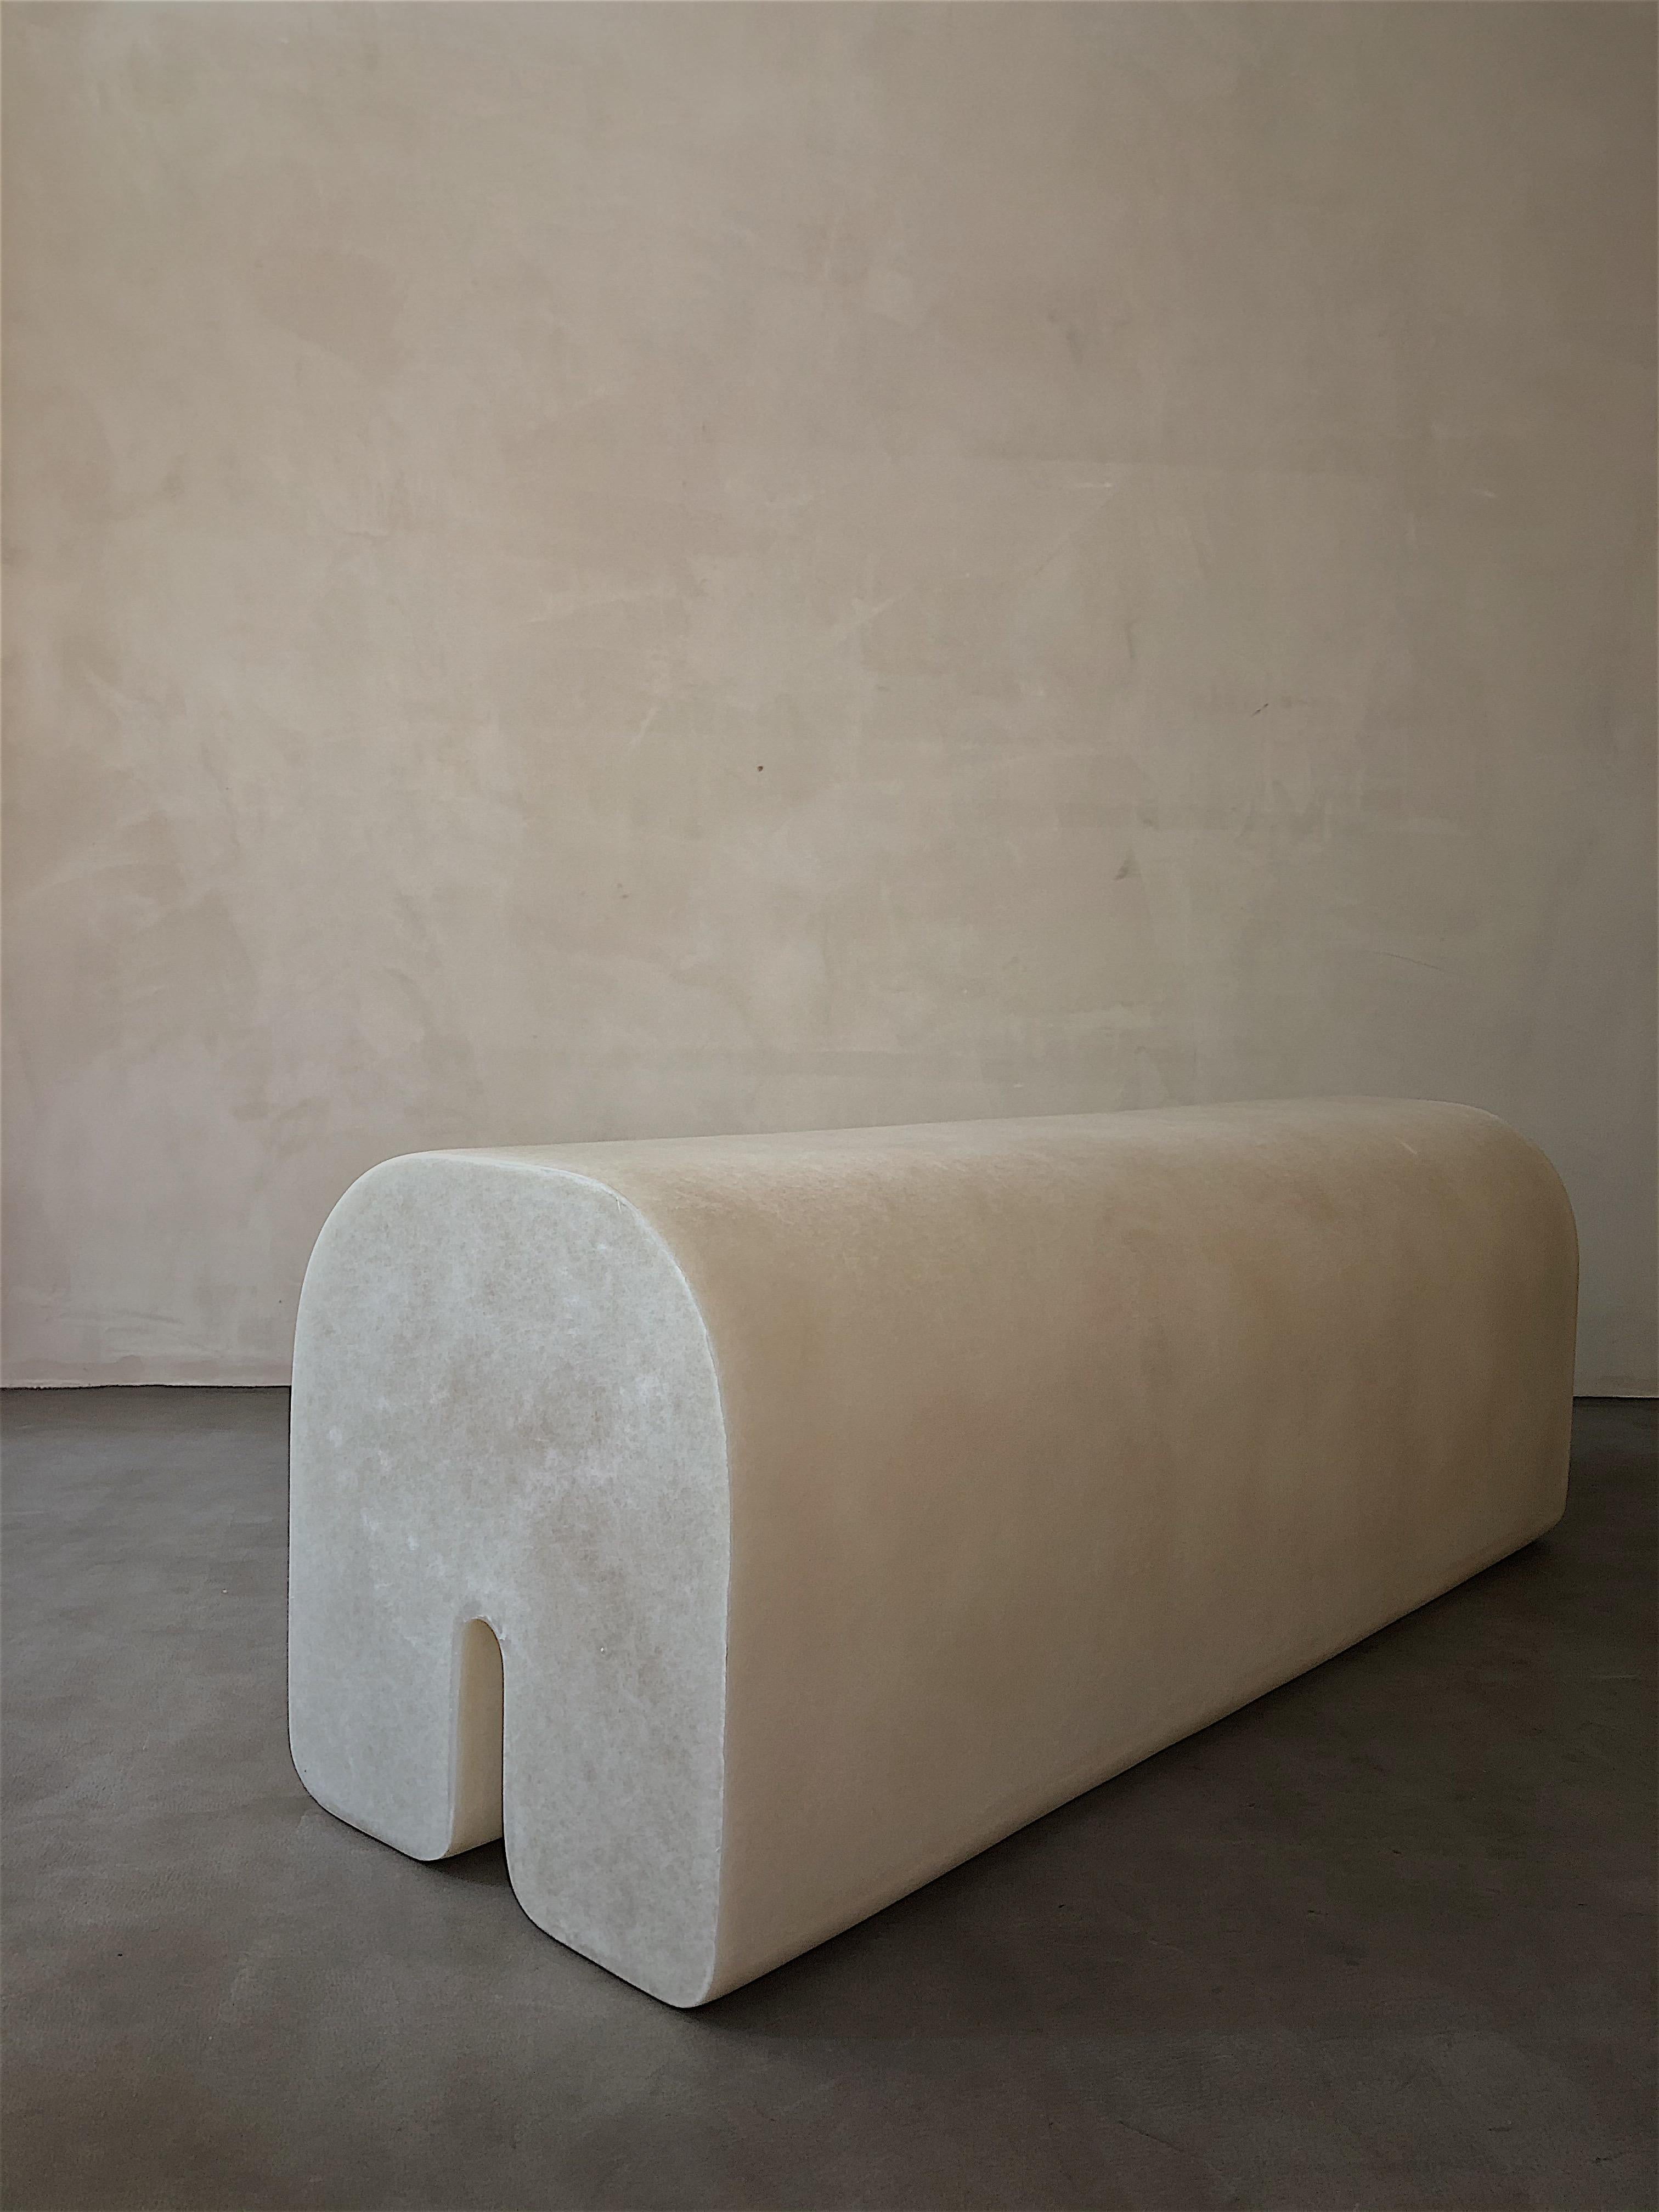 White arch bench by Karstudio
Materials: FRP
Dimensions: 120 x 40 x 43 cm

*This piece is suitable for outdoor use.

Both display ways make it the focus of the space. It could be laid as a bench and stand up as a stand for art work.

Kar- is